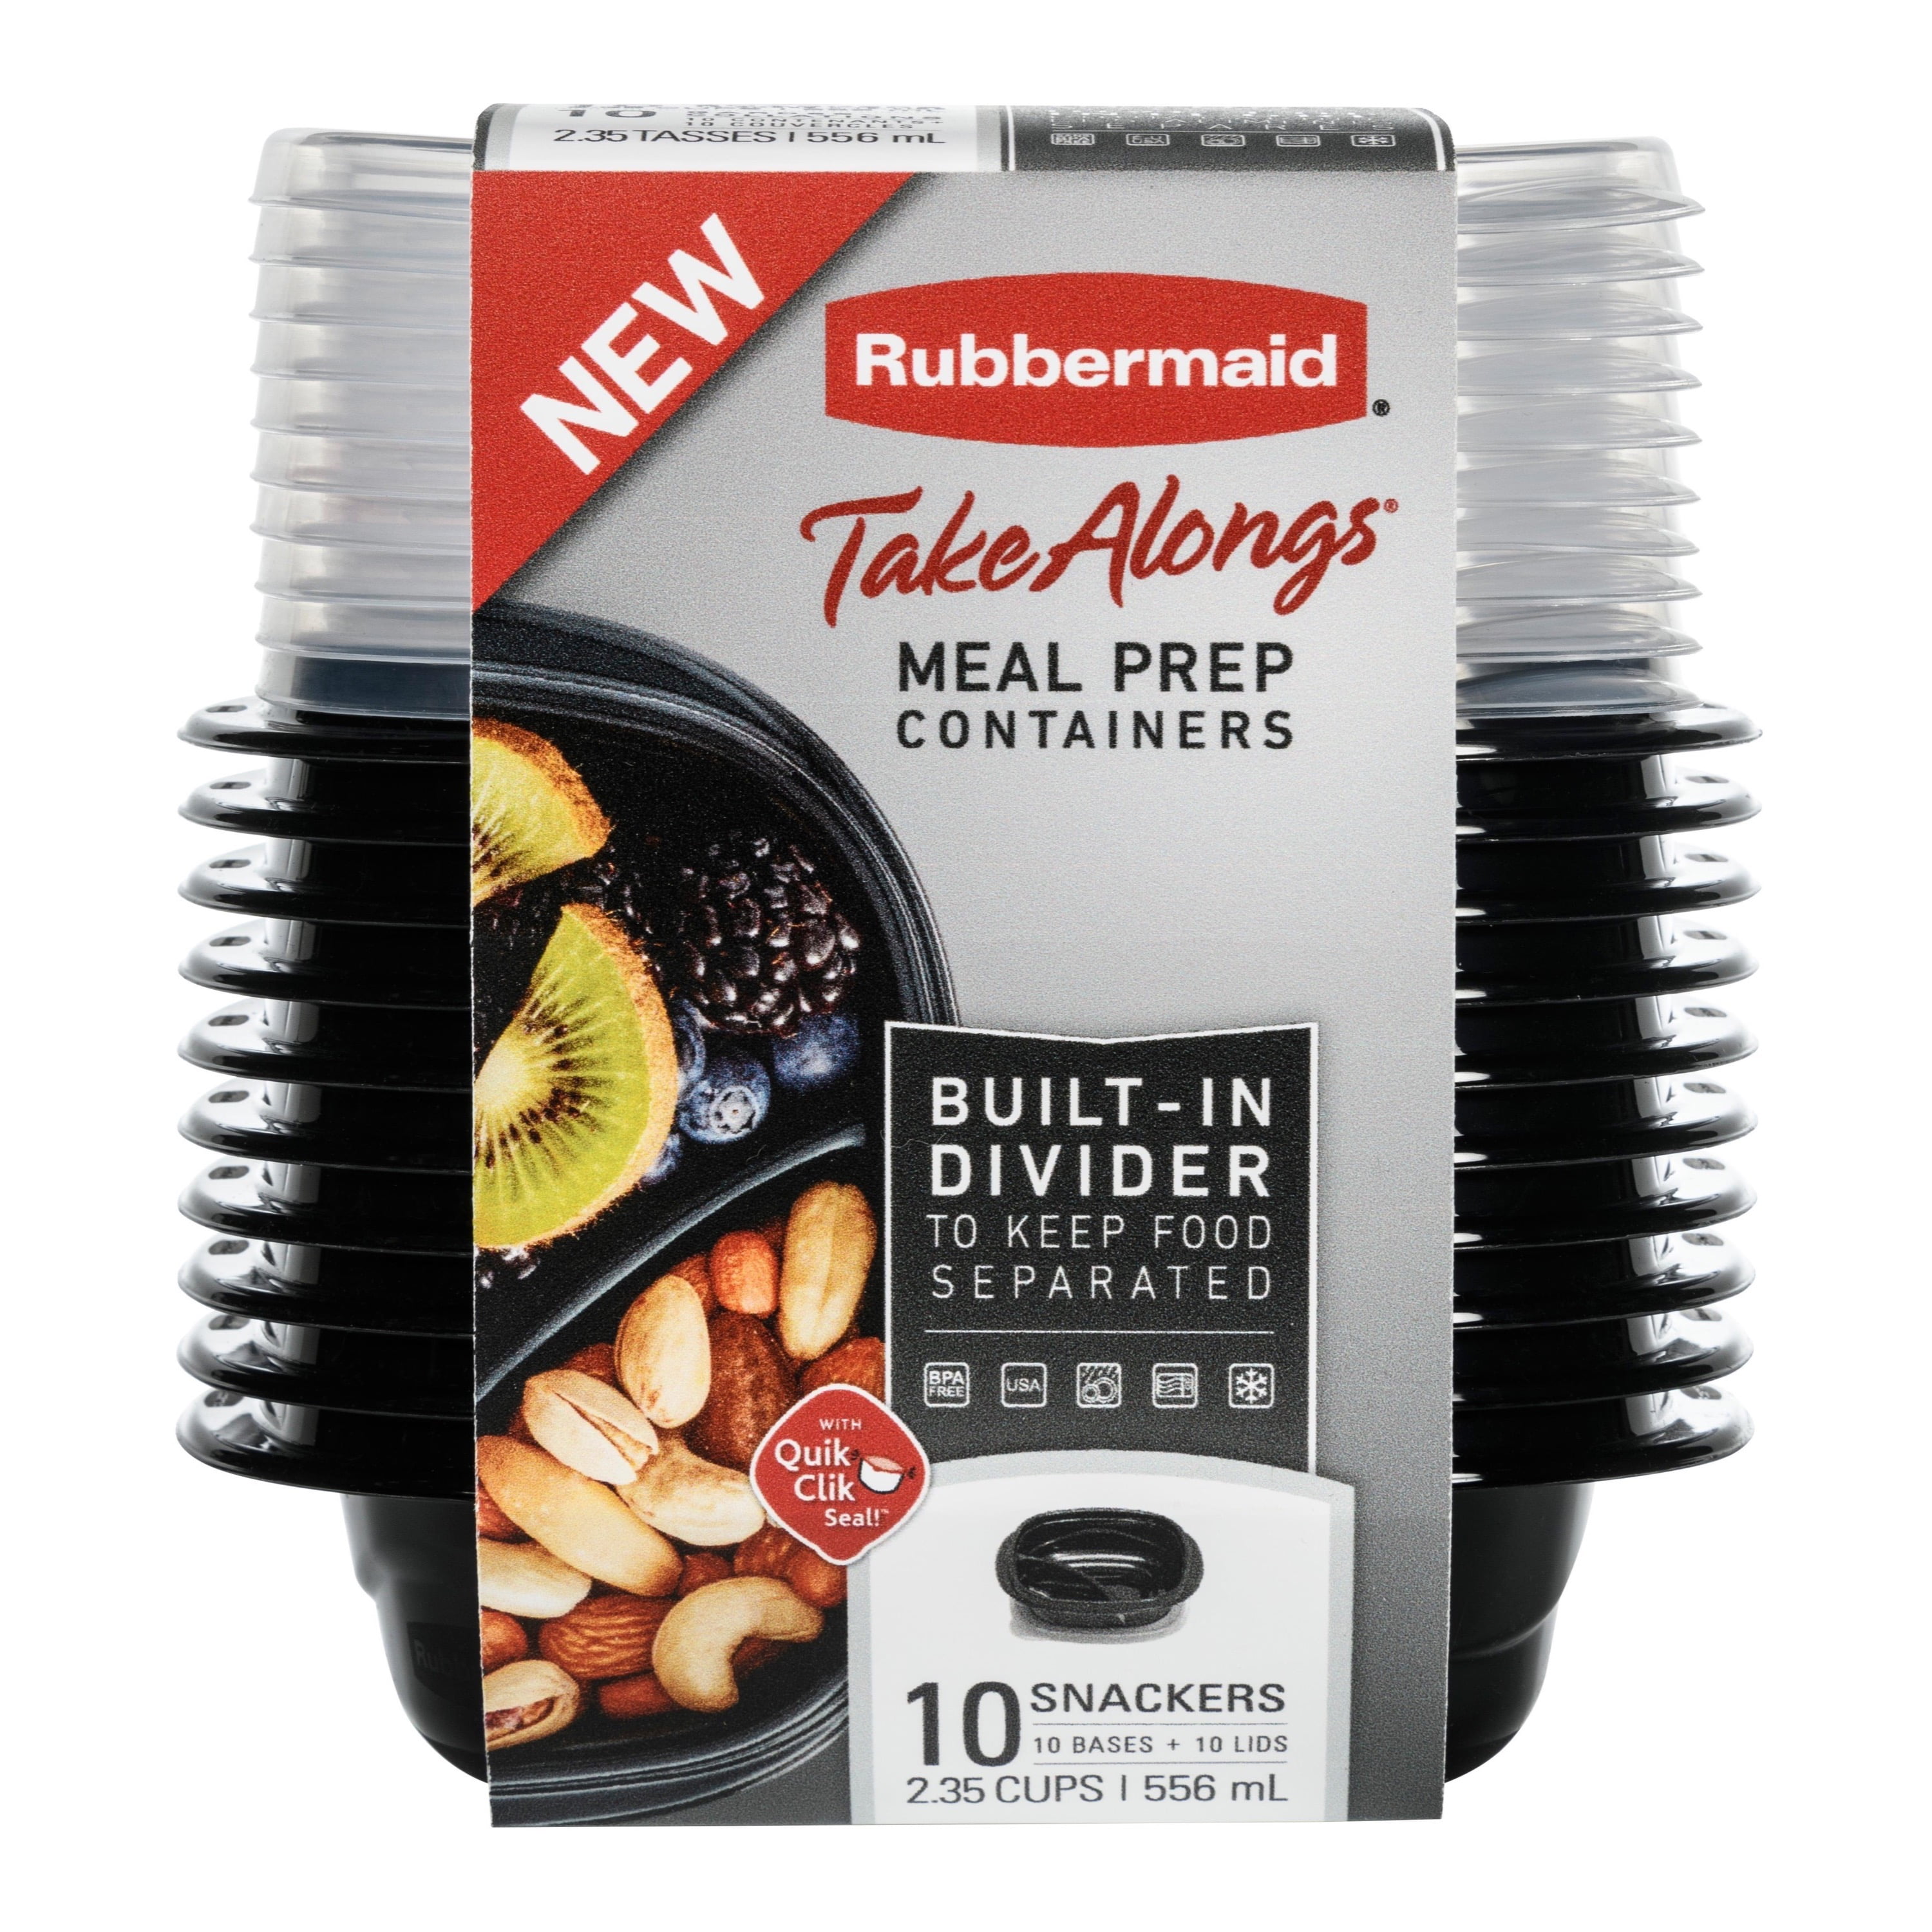 Rubbermaid Take Alongs 50 Piece Food Storage Set with 2 Meal Prep containers 